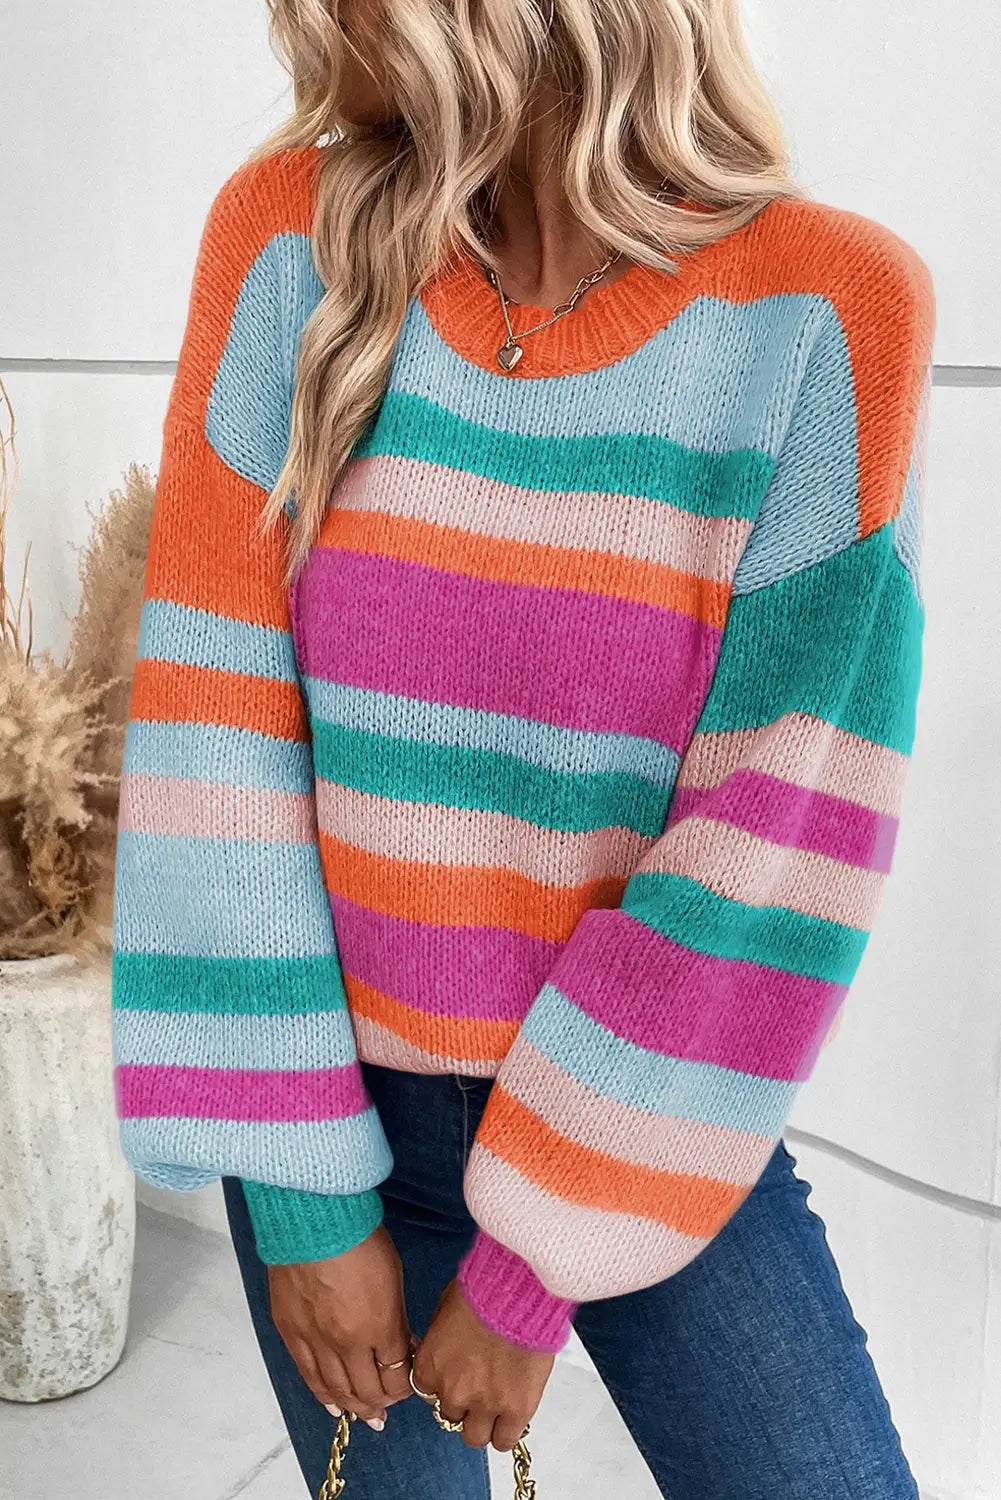 Multicolor striped knit drop shoulder puff sleeve sweater - s / 60% acrylic + 40% polyamide - tops